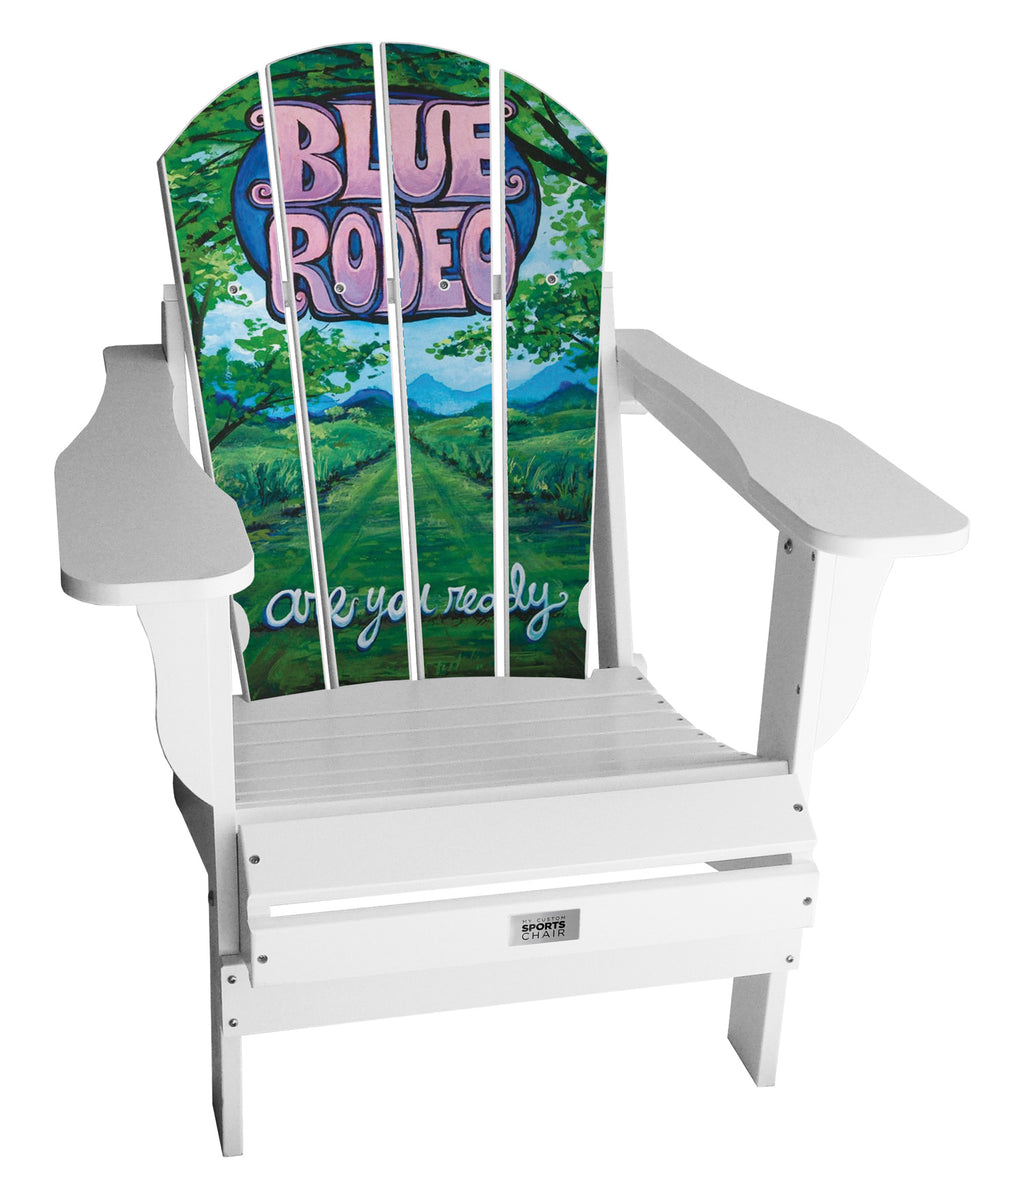 Are You Ready Officially Licensed Blue Rodeo Chair